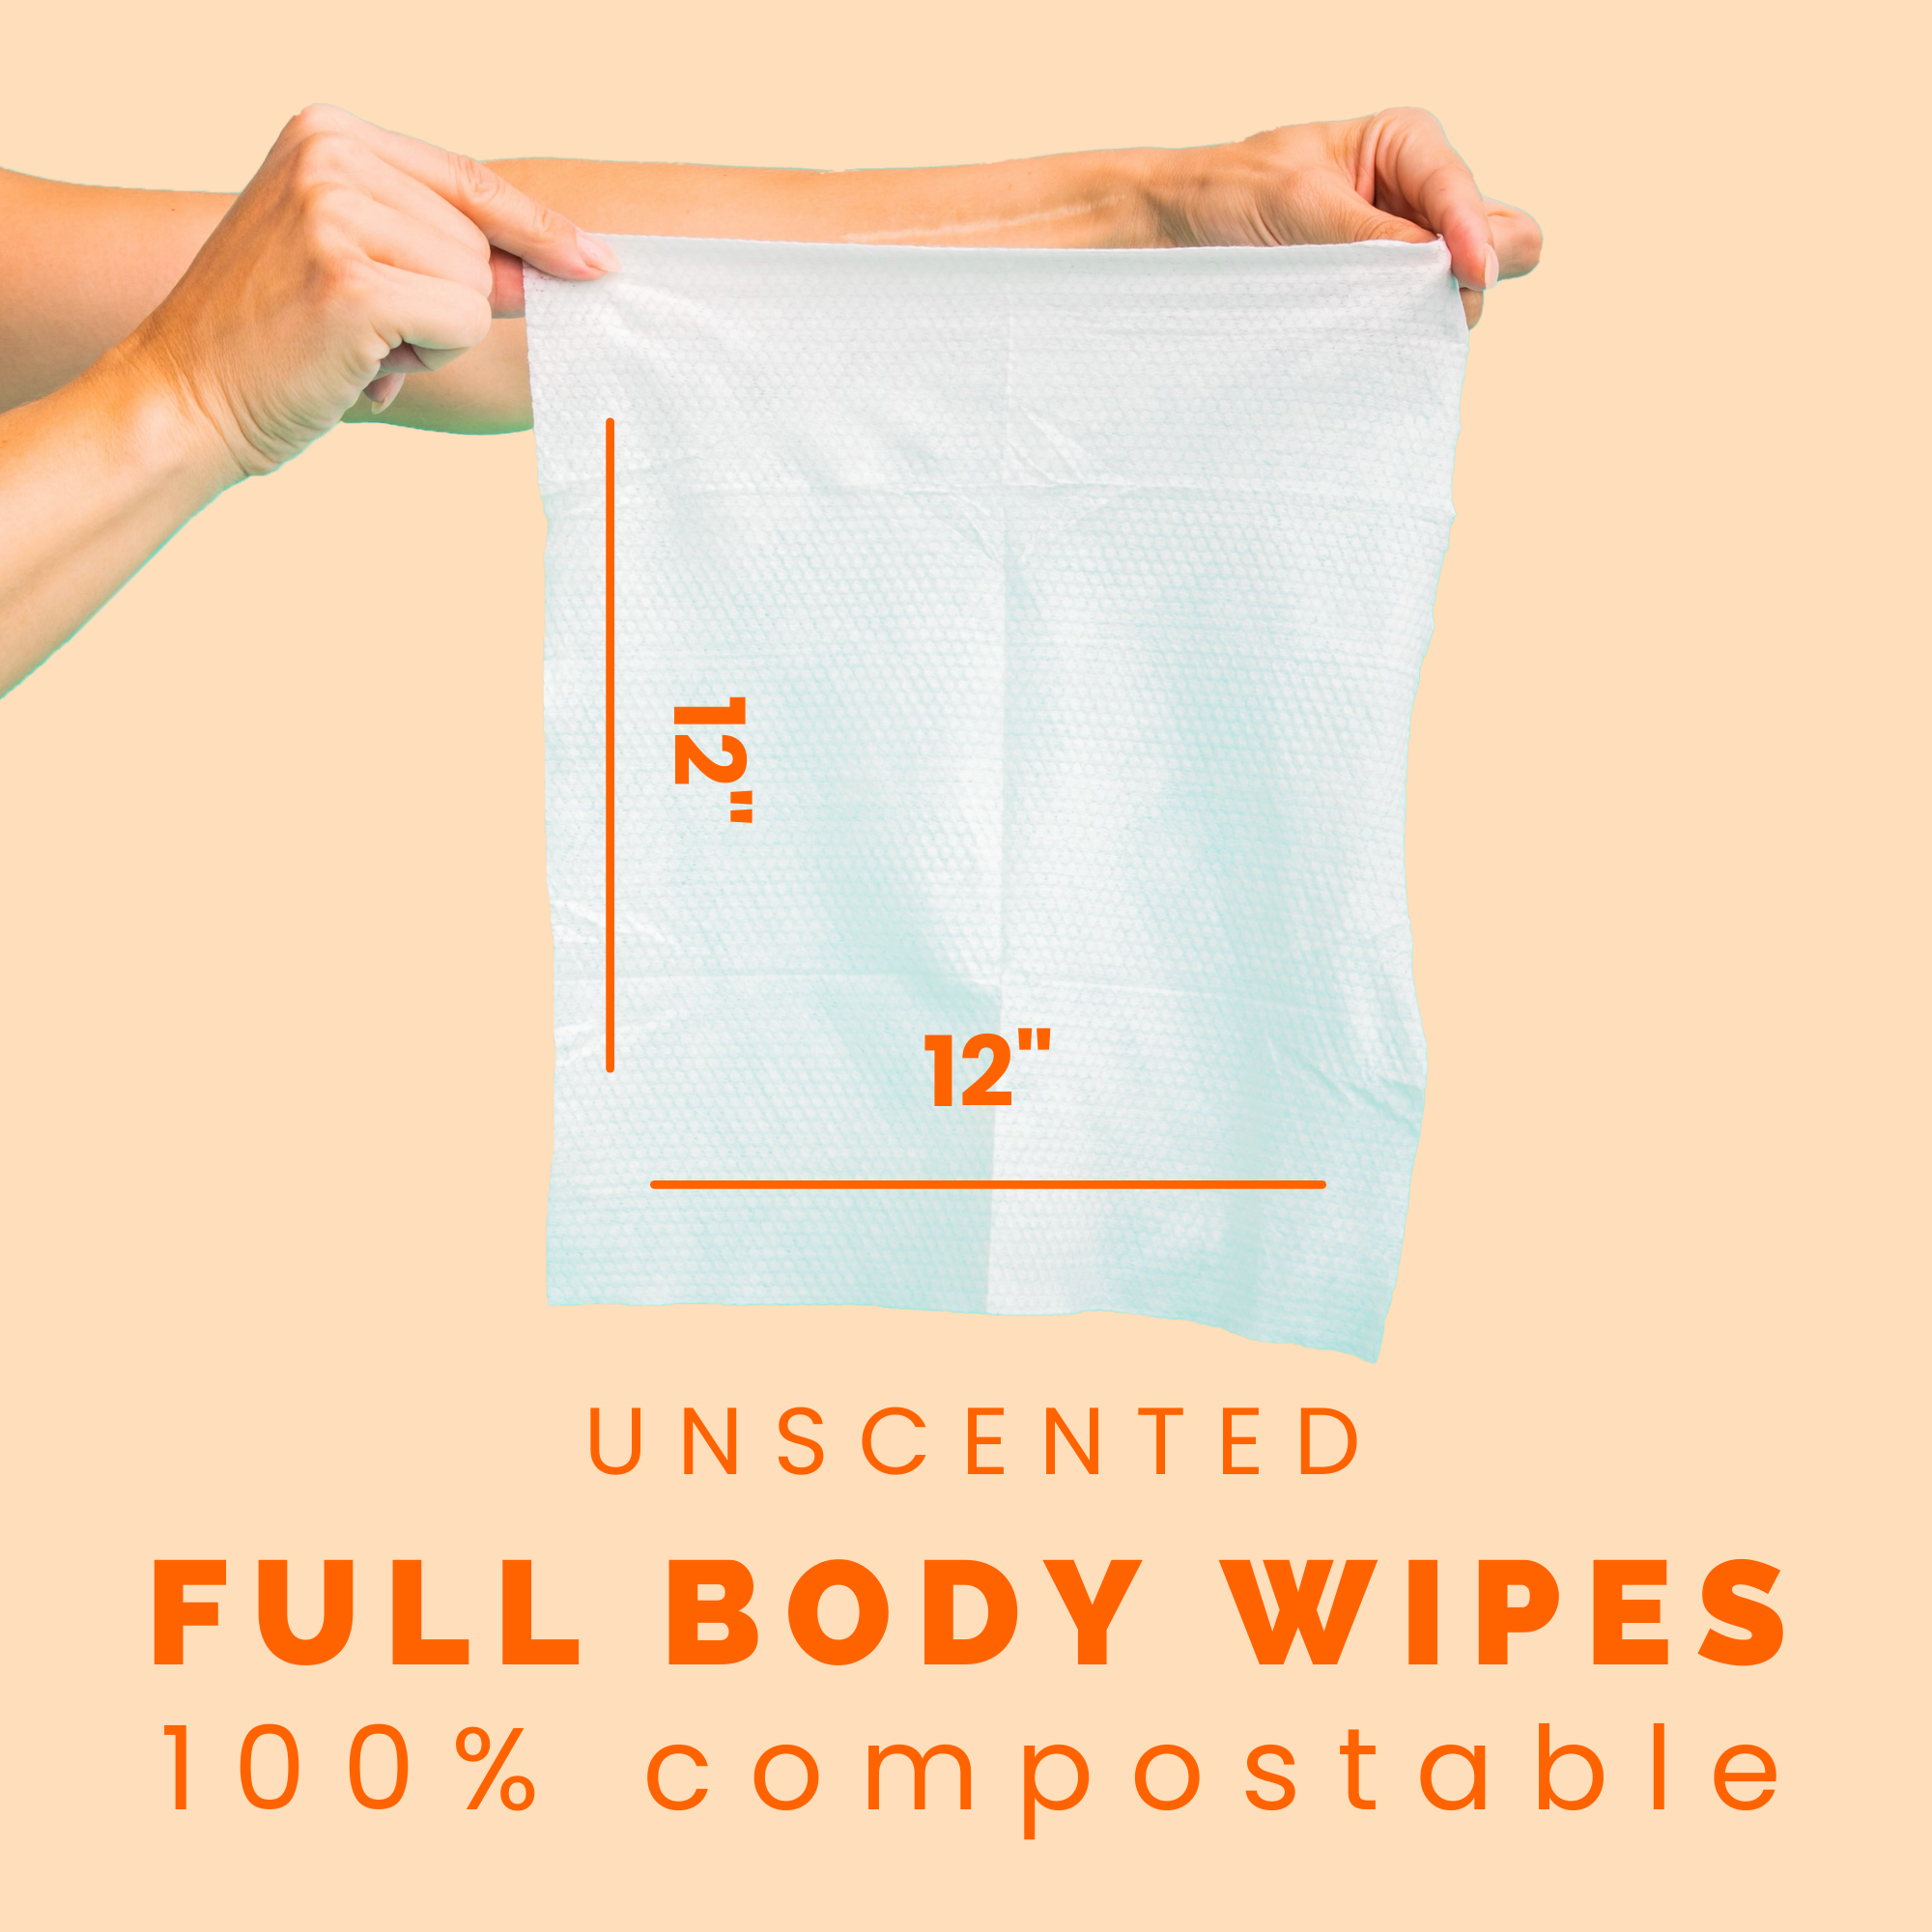 HyperGo Full Body Wipes are 12 inches square and fully compostable.